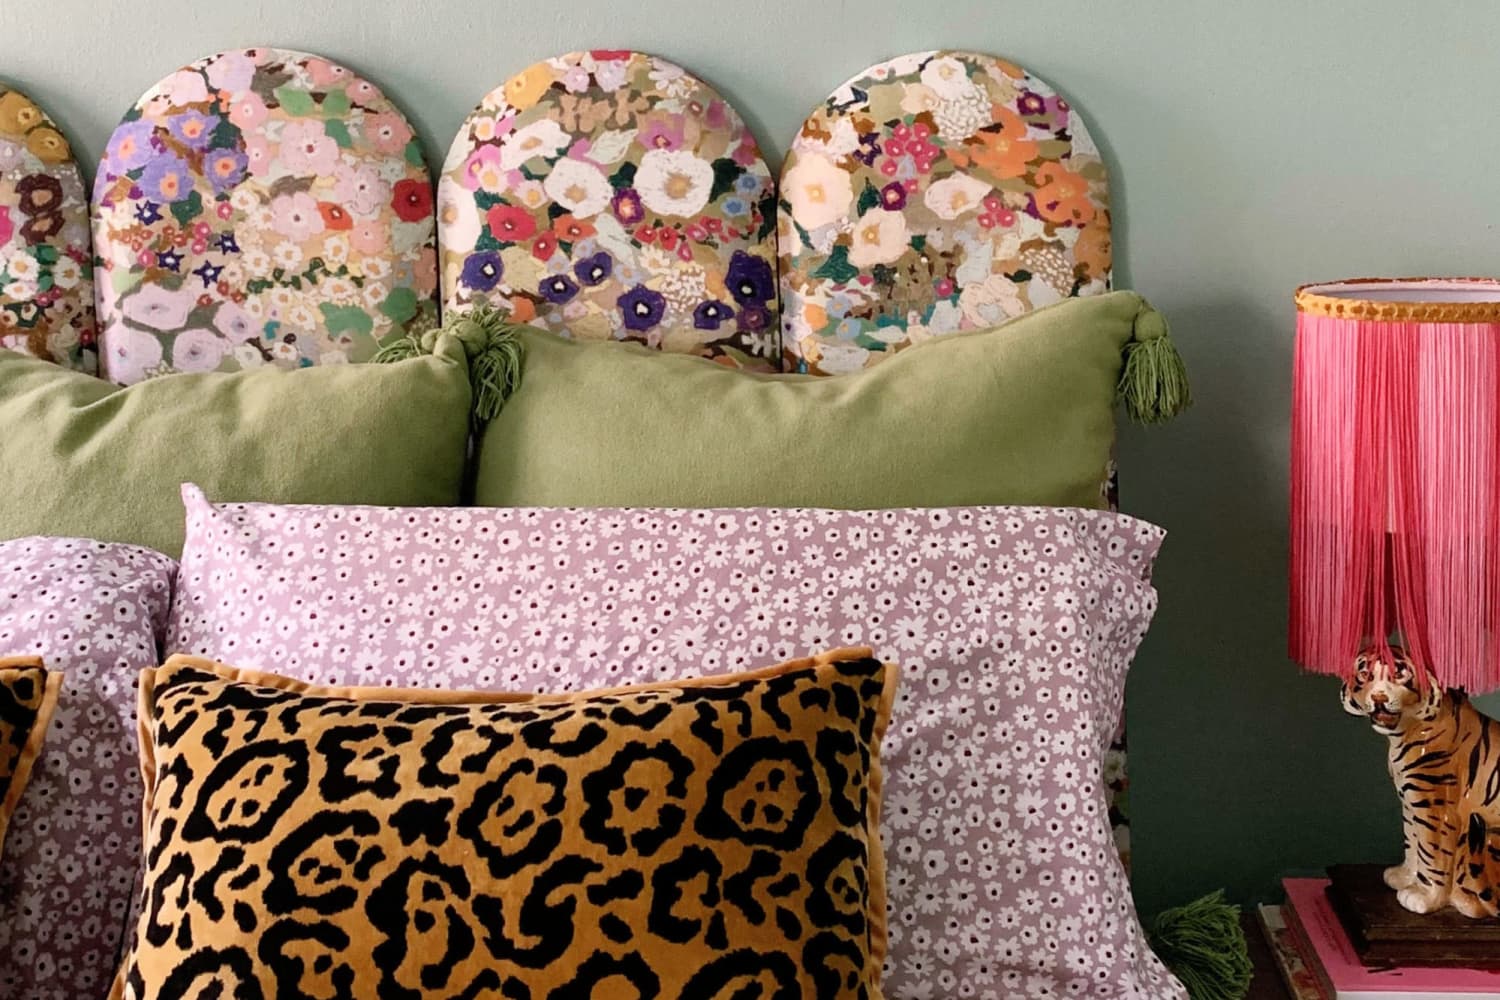 5 Gorgeous DIY Headboards Made with Unexpected Materials